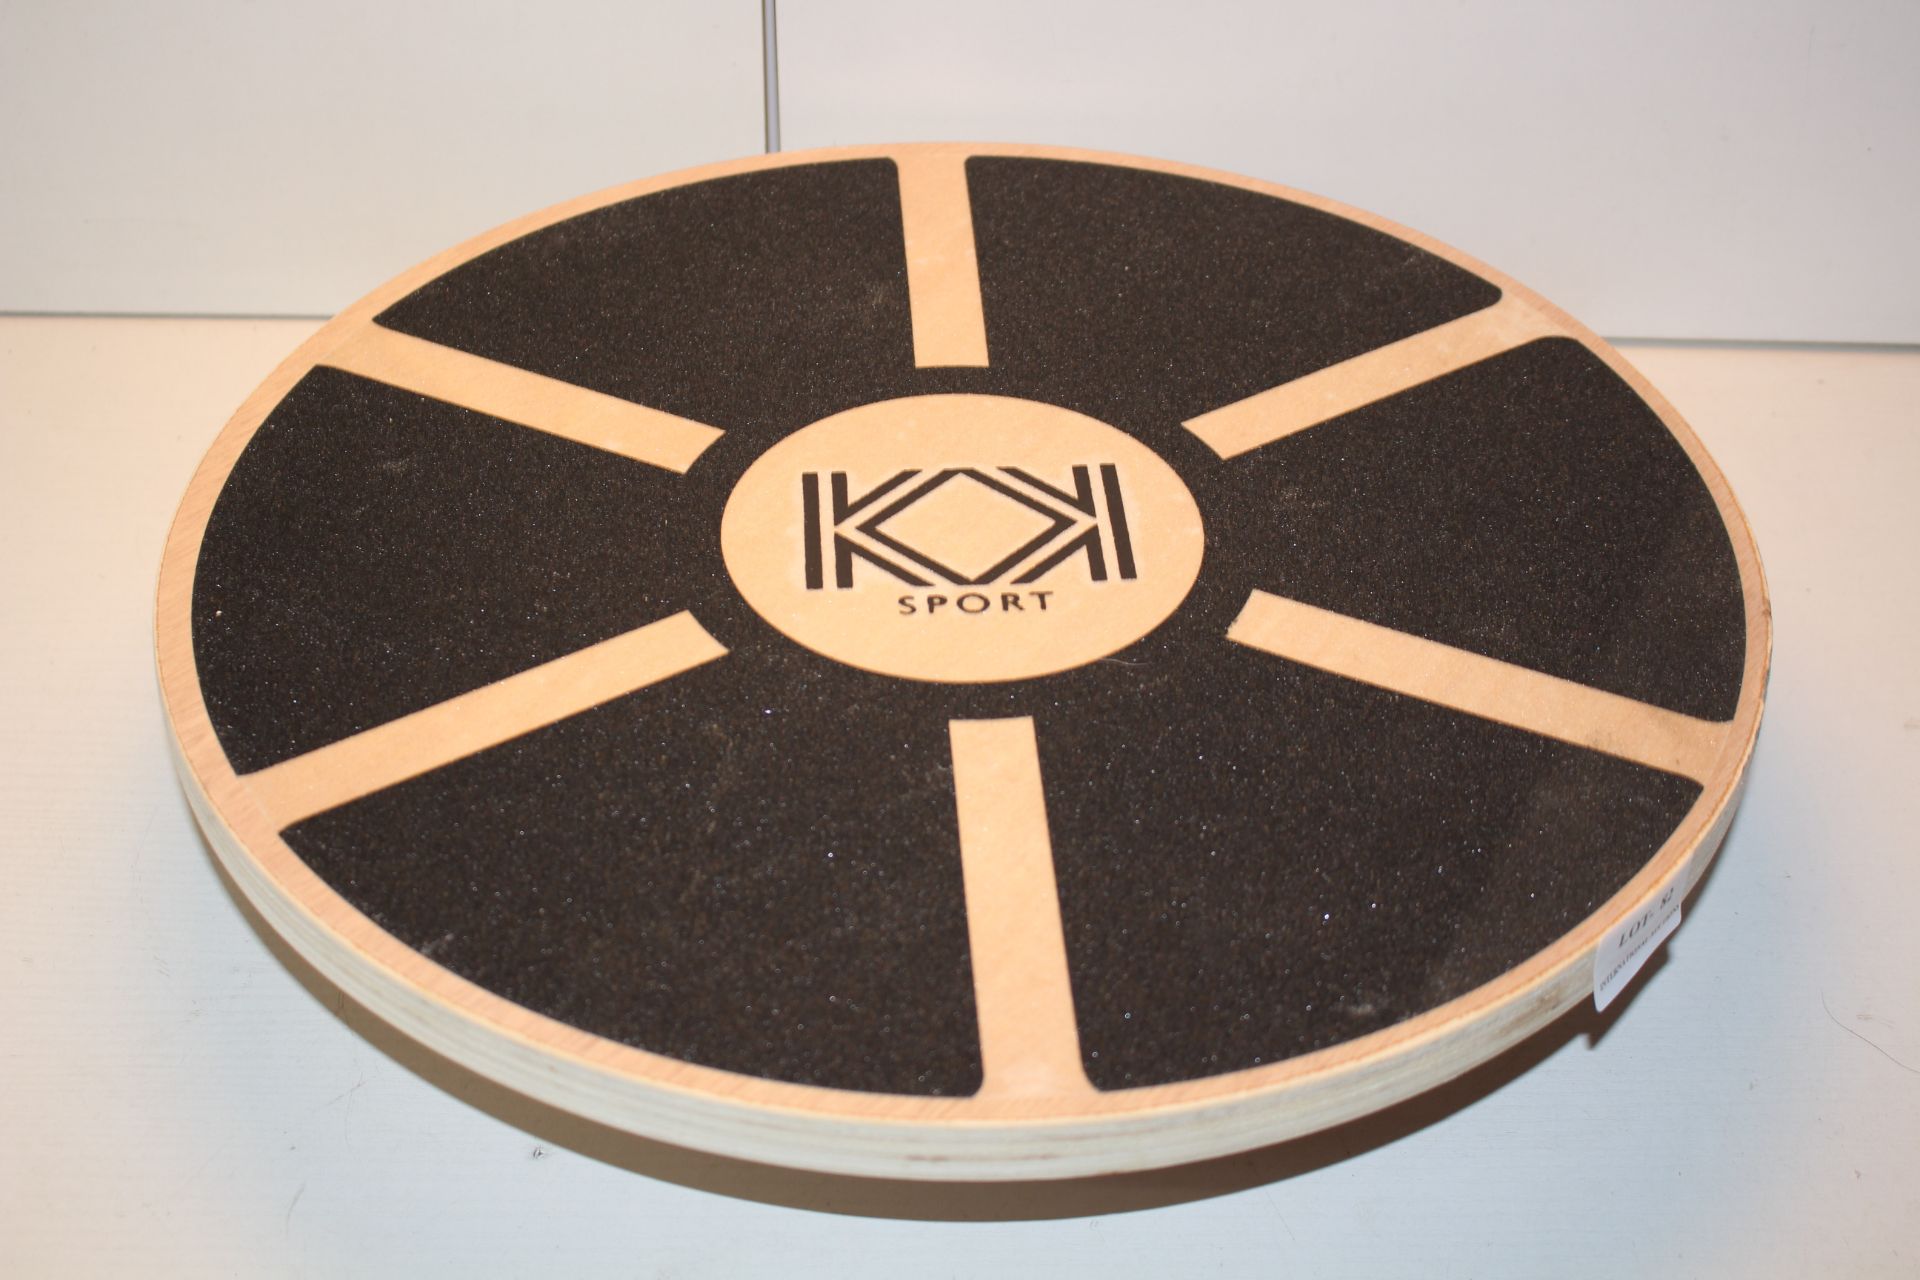 UNBOXED KK SPORT BALANCE BOARD Condition ReportAppraisal Available on Request- All Items are